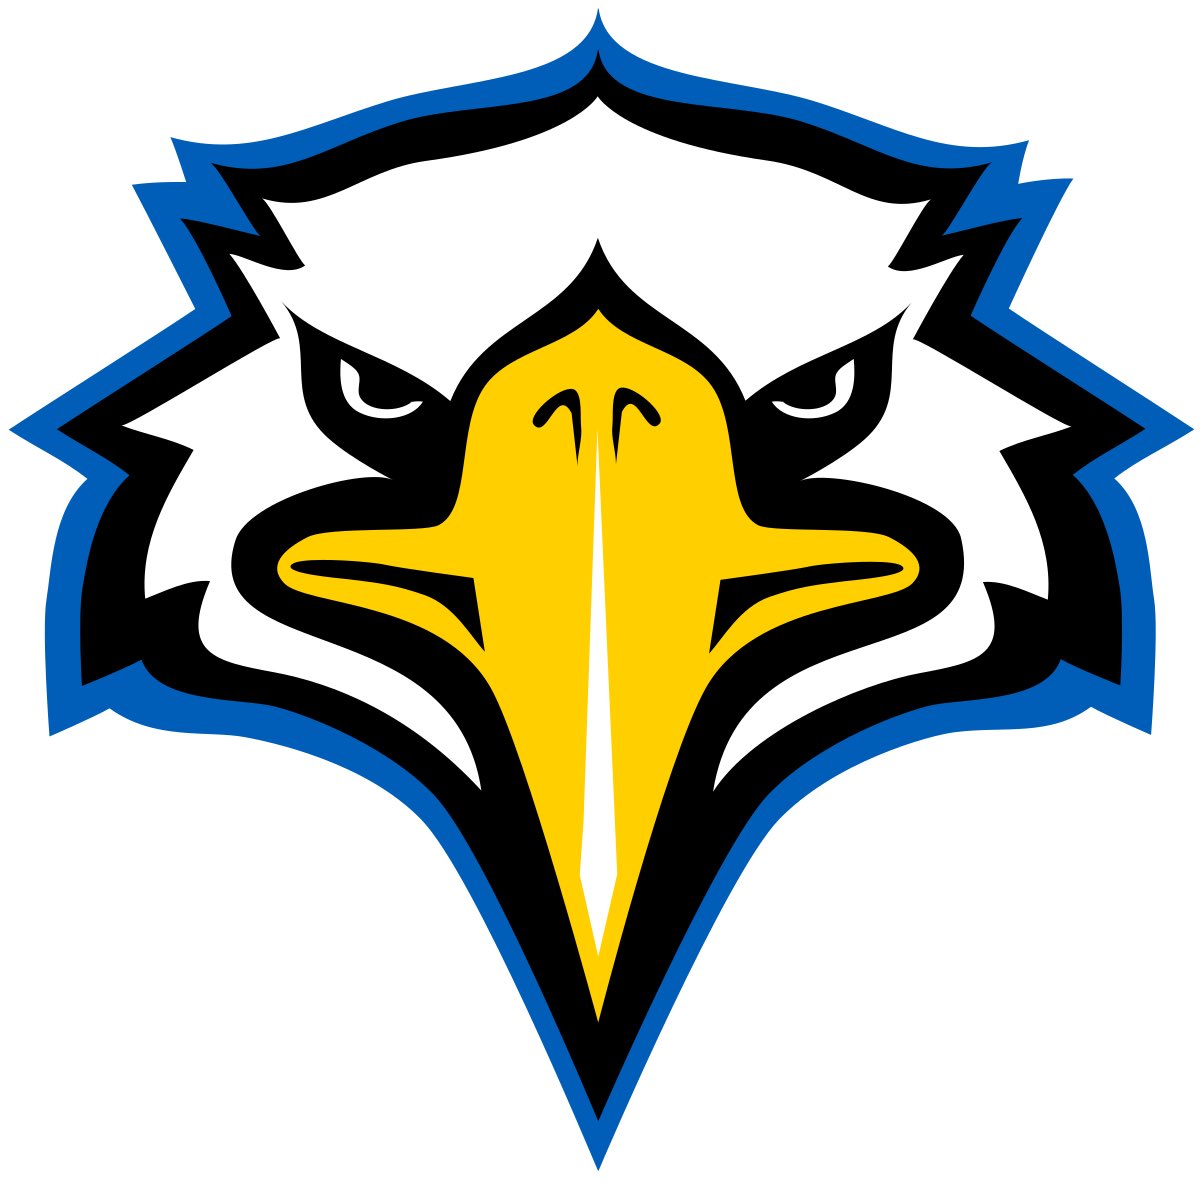 I’m excited and blessed to announce my commitment to Morehead State University of the OVC. I am thankful for my family, friends, and coaches who have helped me in making this decision. @CCS_Warriors @MSUEaglesBsball @LVillarreal32 @jsteinhit #D1athlete #Goeagles